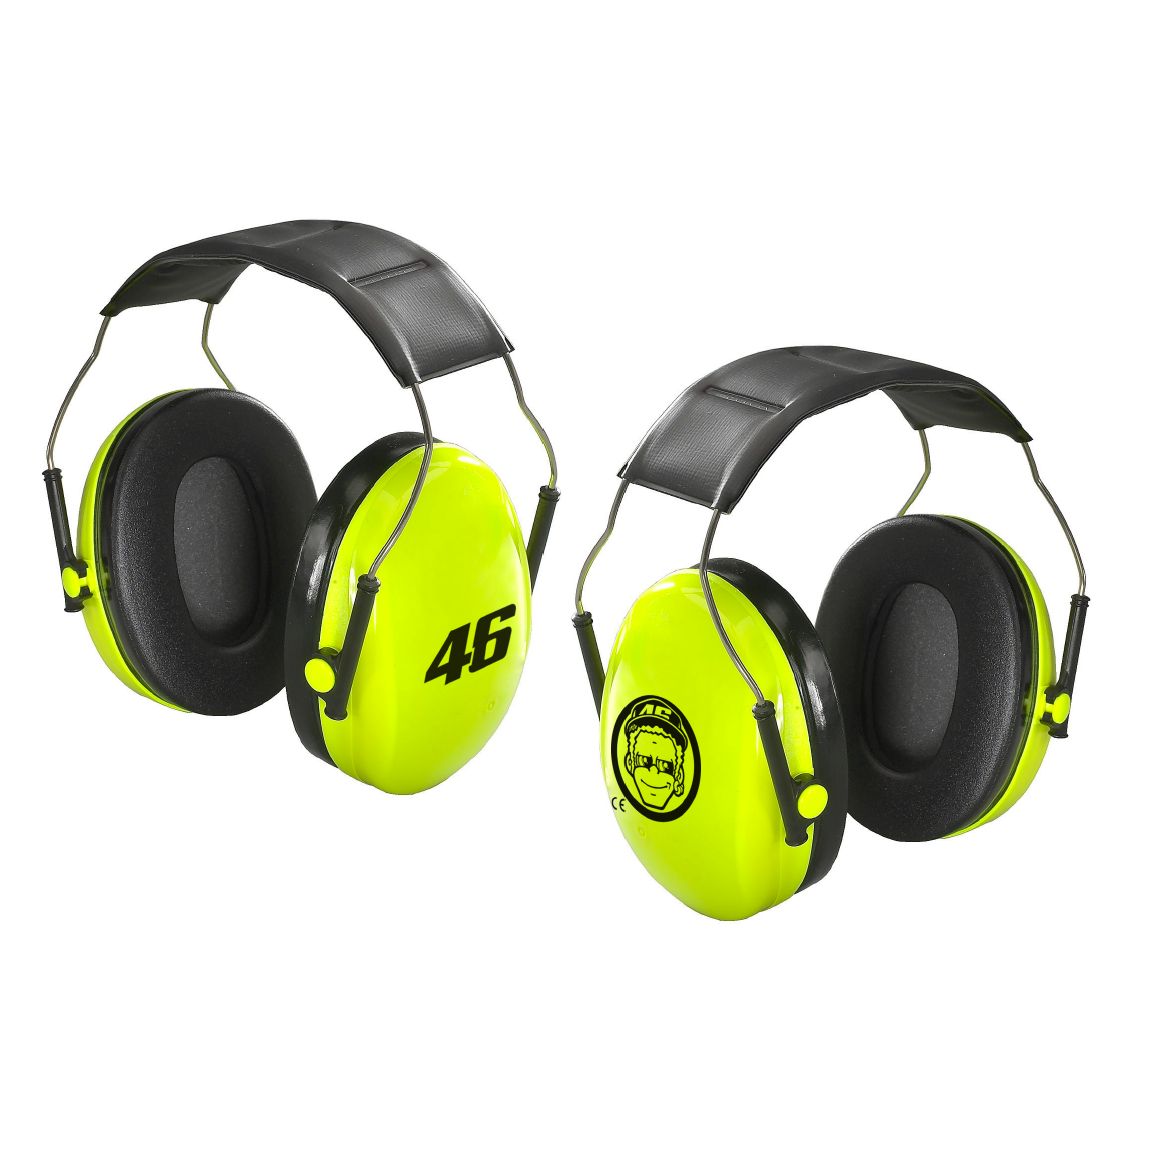 Image of Casque anti-bruit VR 46 VR46 - FLUO YELLOW